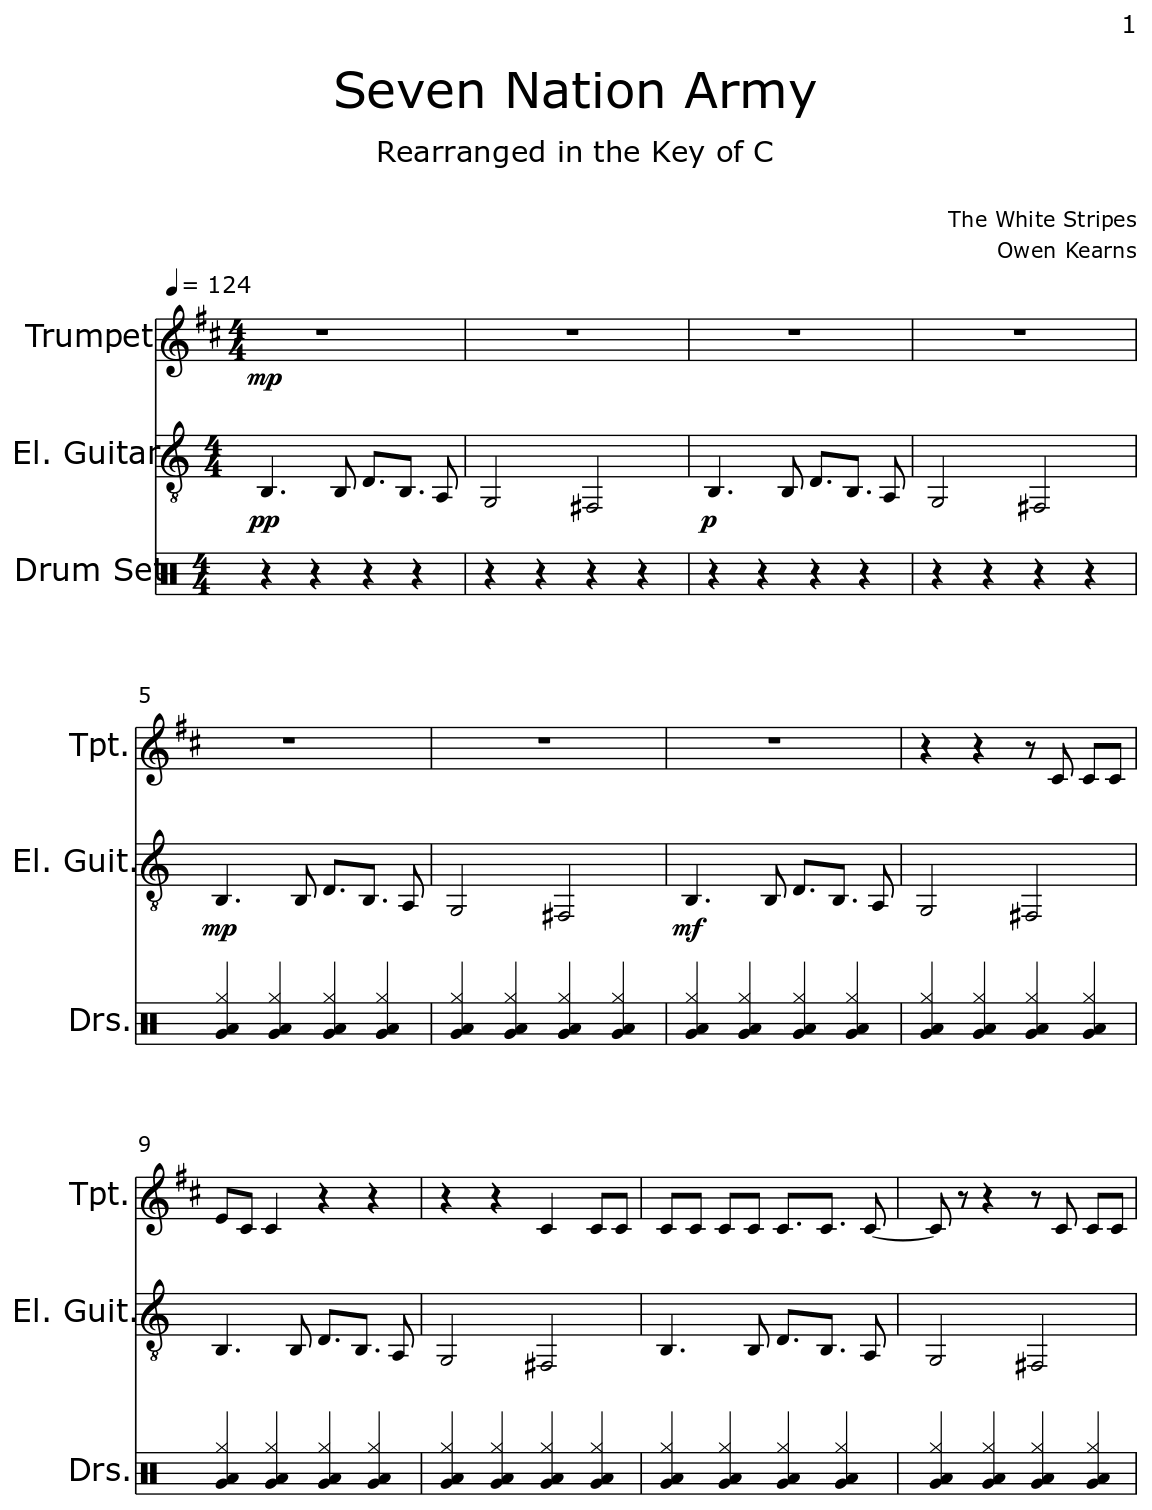 Seven Nation Army - Sheet music for Trumpet, Electric Guitar, Drum Set